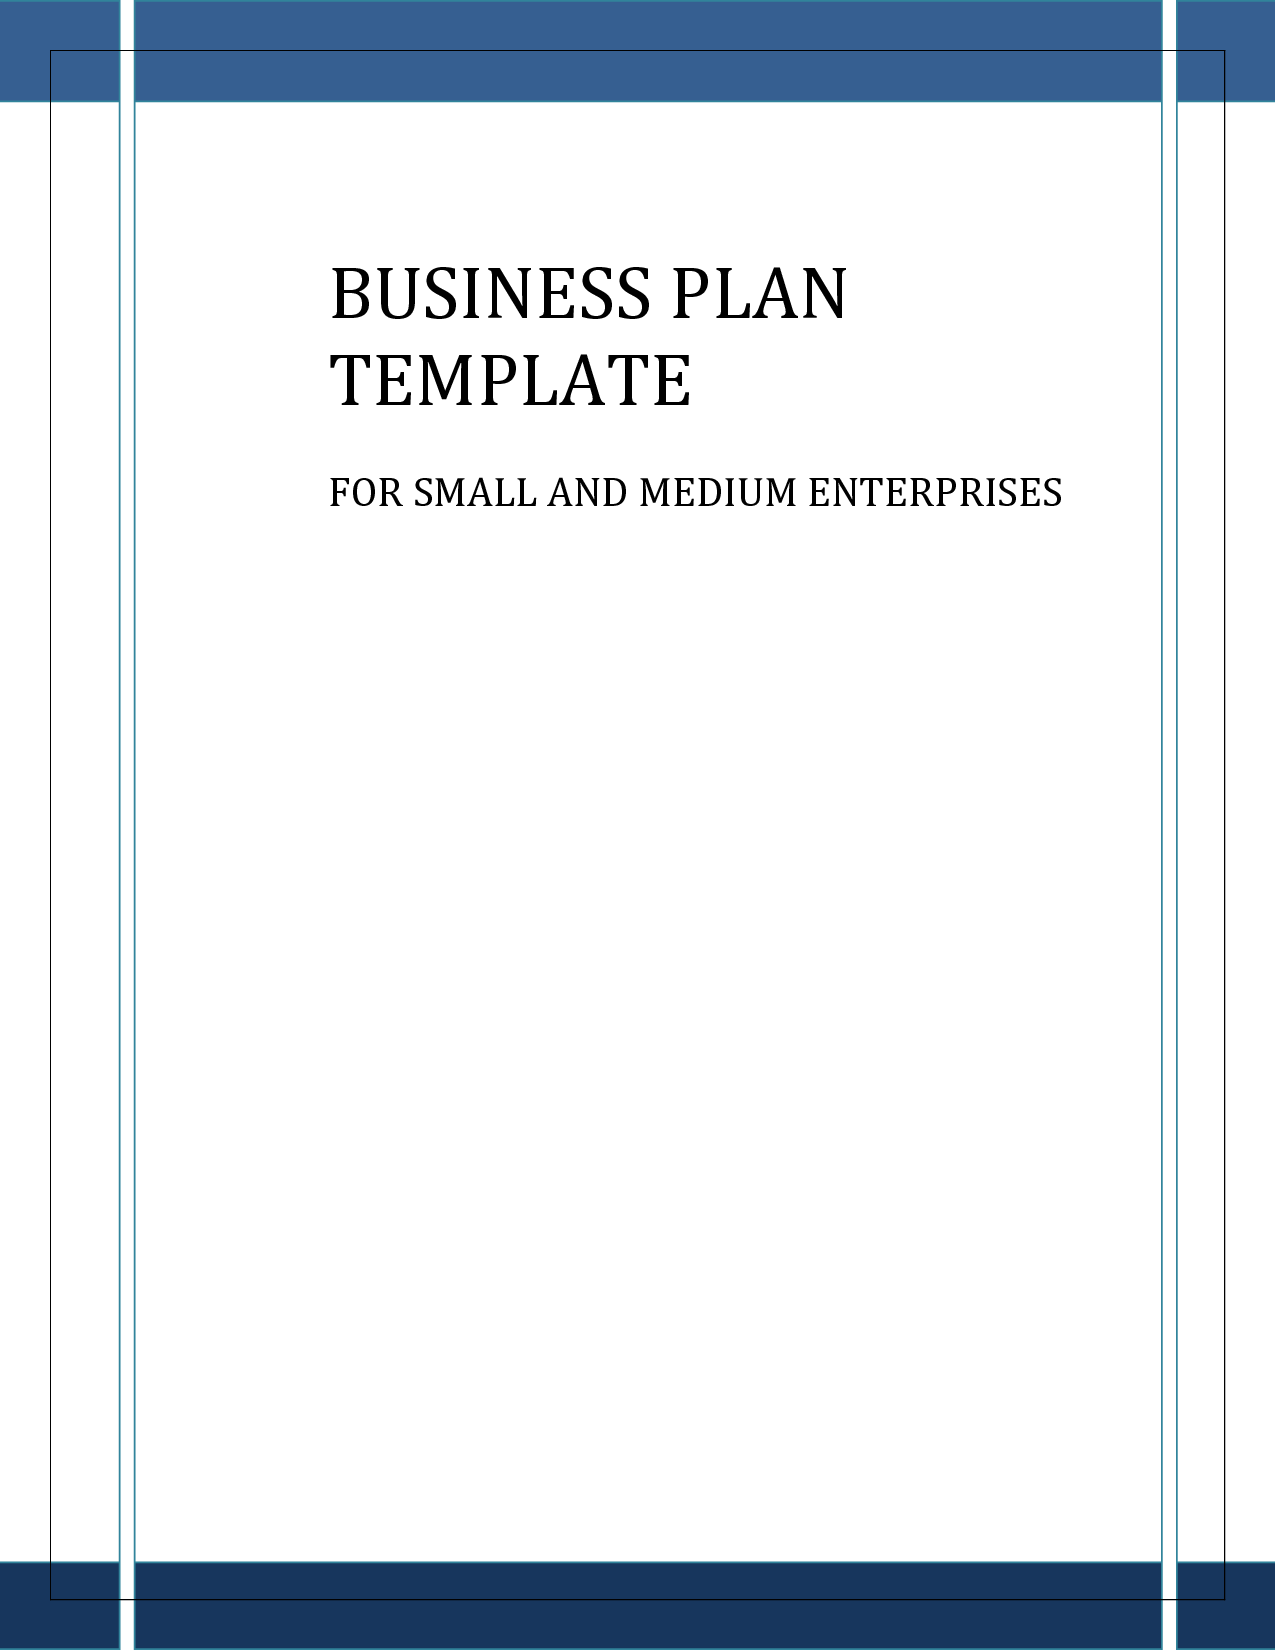 Business Plan Templates Free Download | Free Business Template